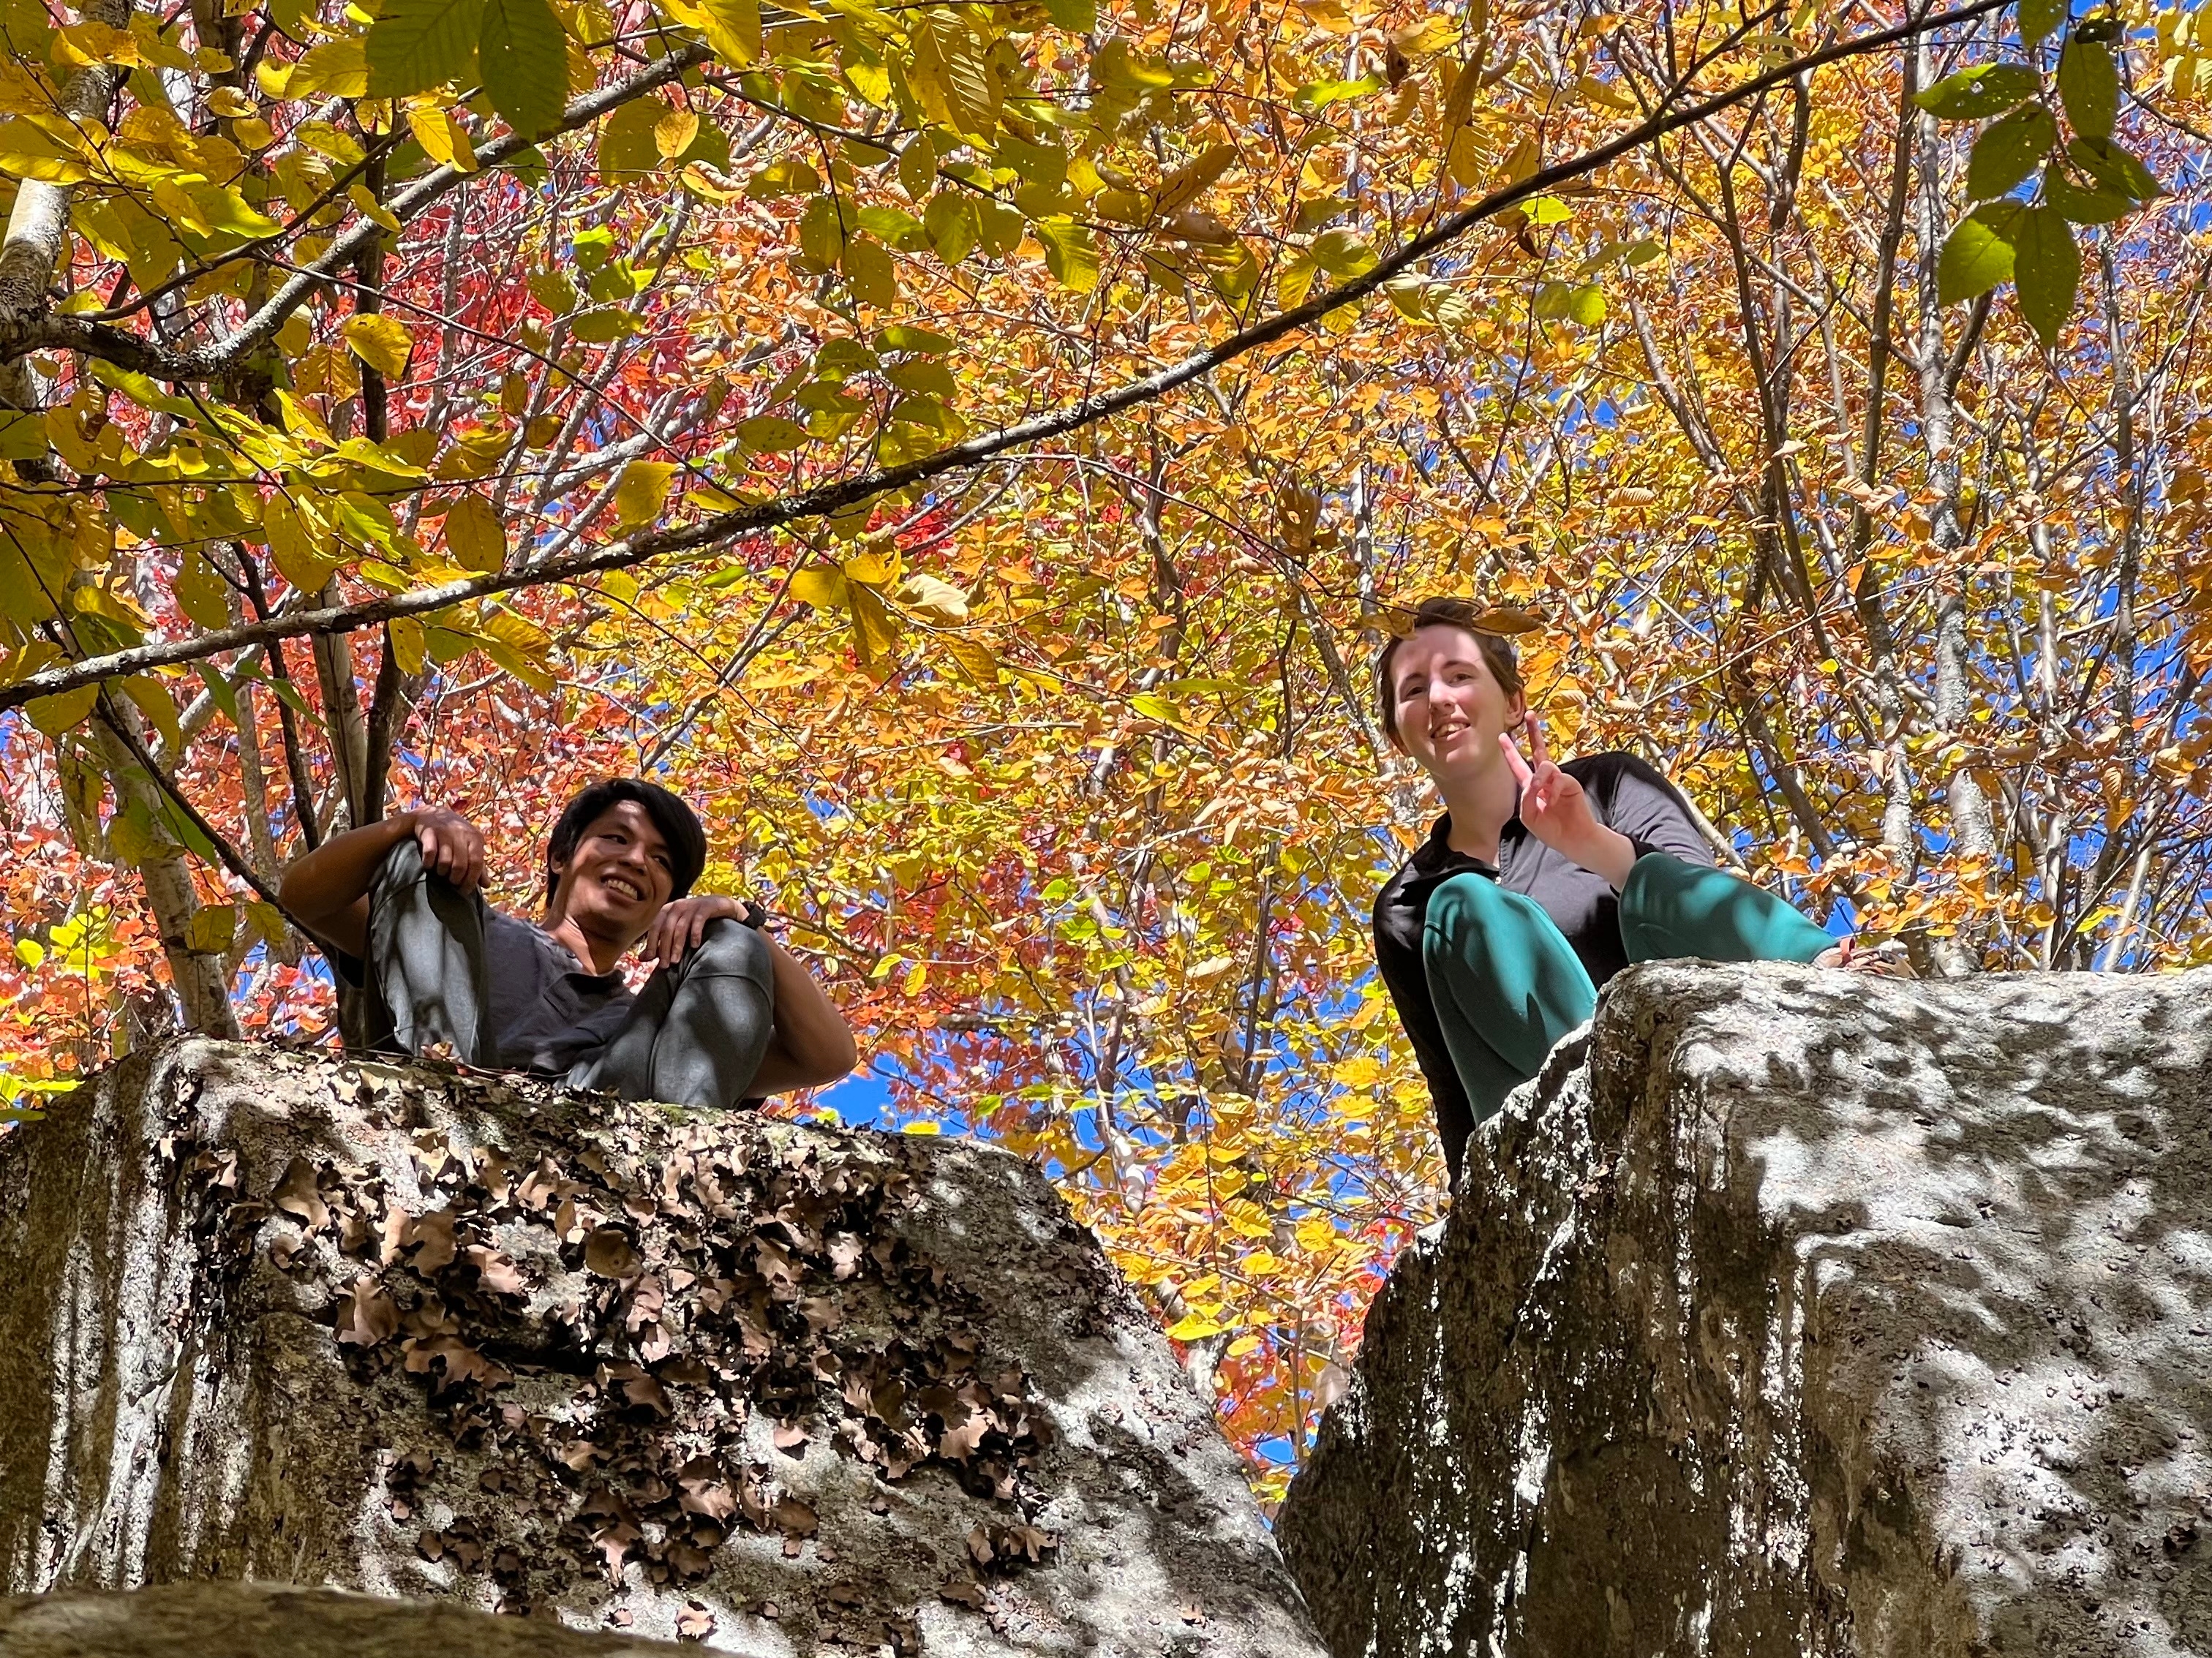 Climbing around some boulders on an autumn hike